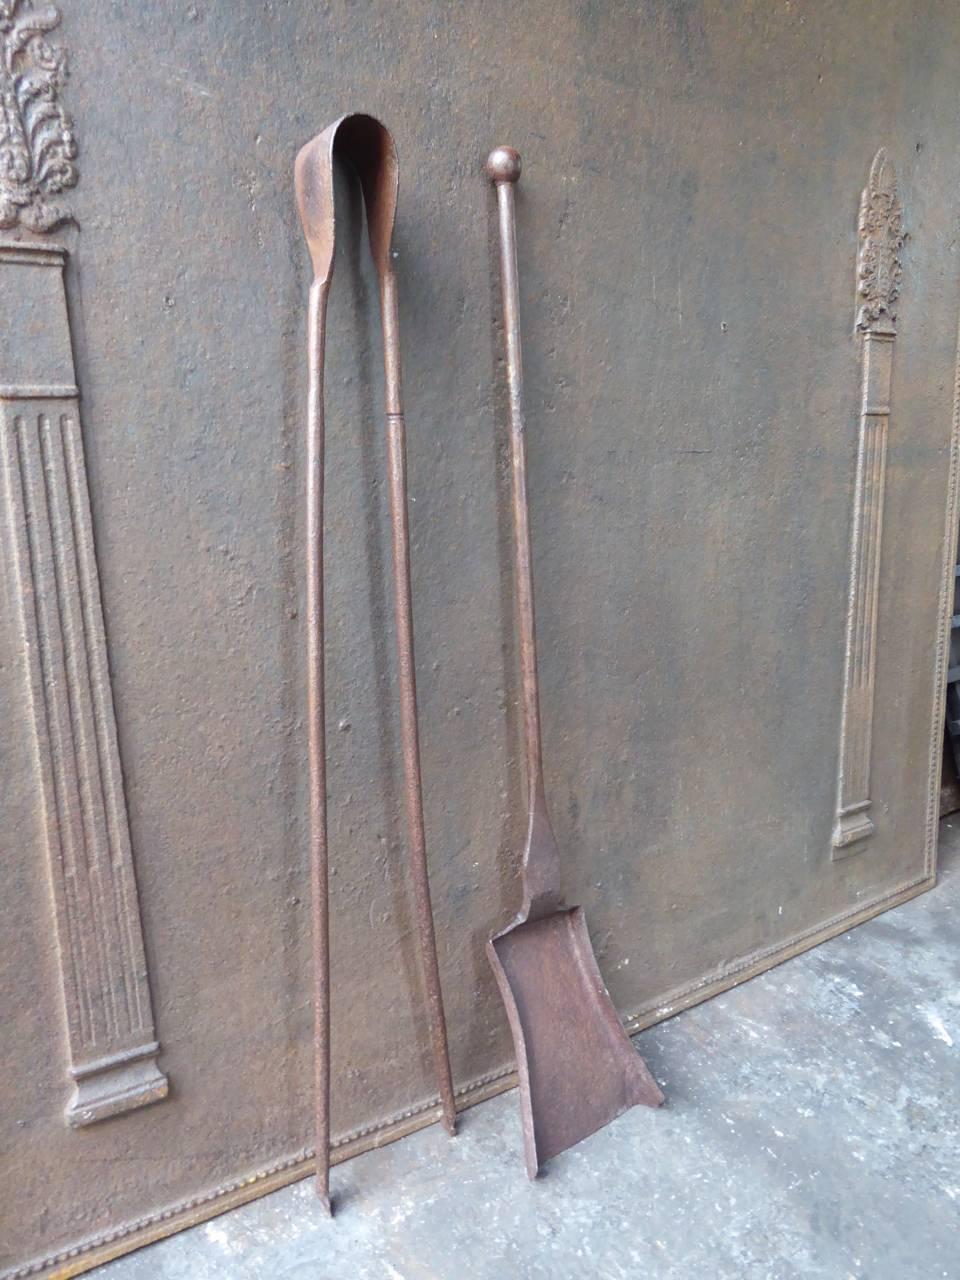 18th century French fire tools or fire irons made of wrought iron.

We have a unique and specialized collection of antique and used fireplace accessories consisting of more than 1000 listings at 1stdibs. Amongst others, we always have 300+